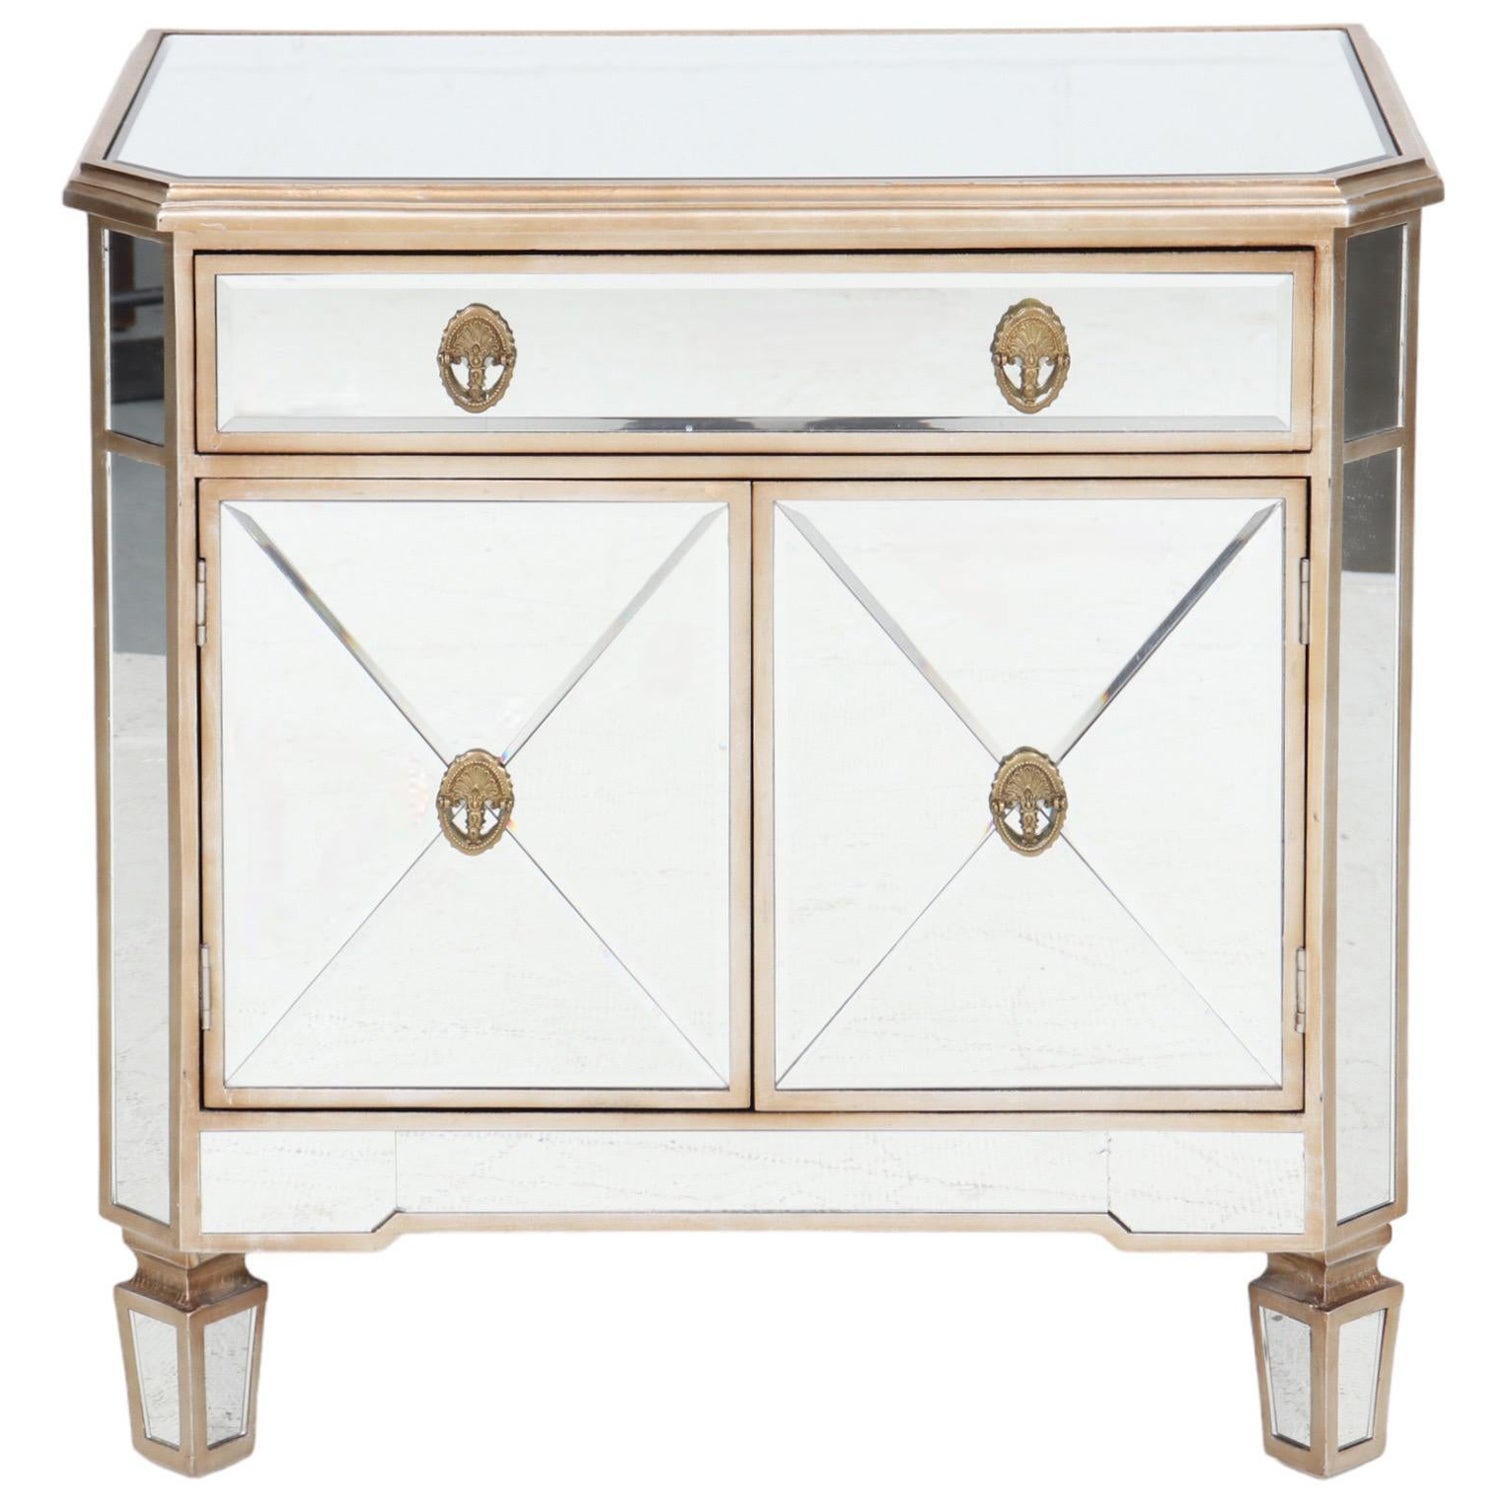 Hollywood Regency Mirrored Cabinet